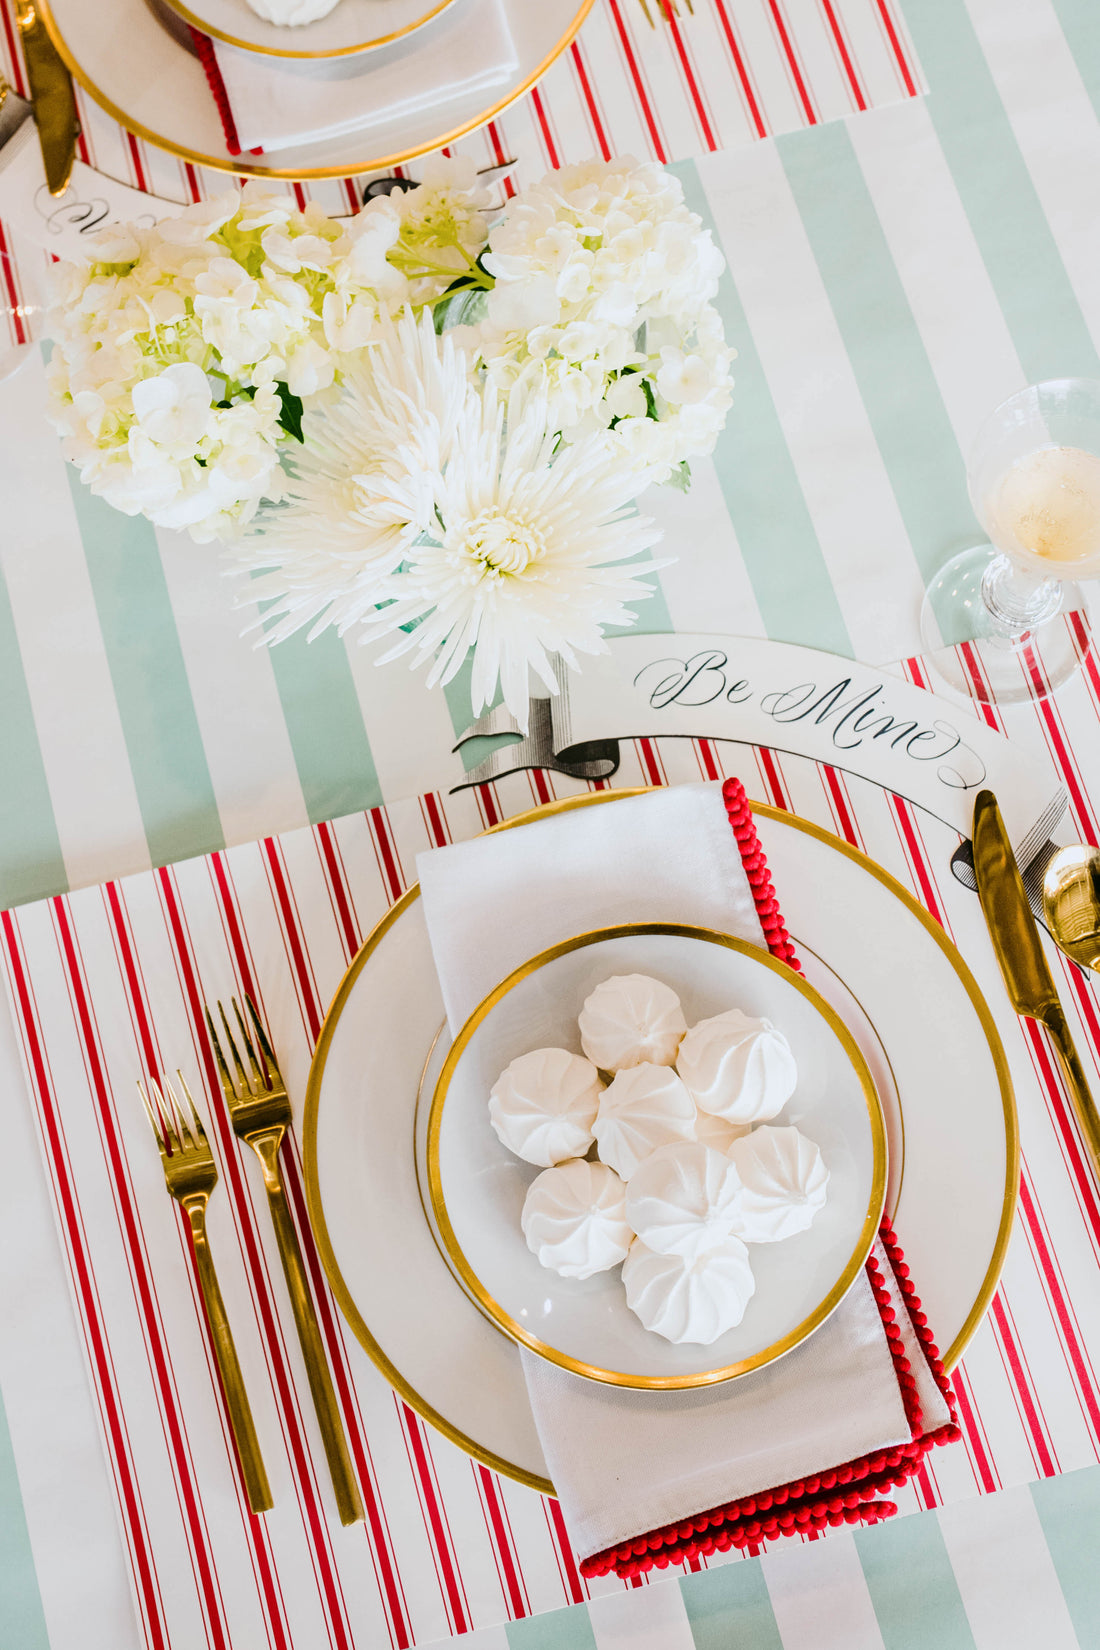 The Red Ribbon Stripe Placemat under an elegant springtime table setting, from above.